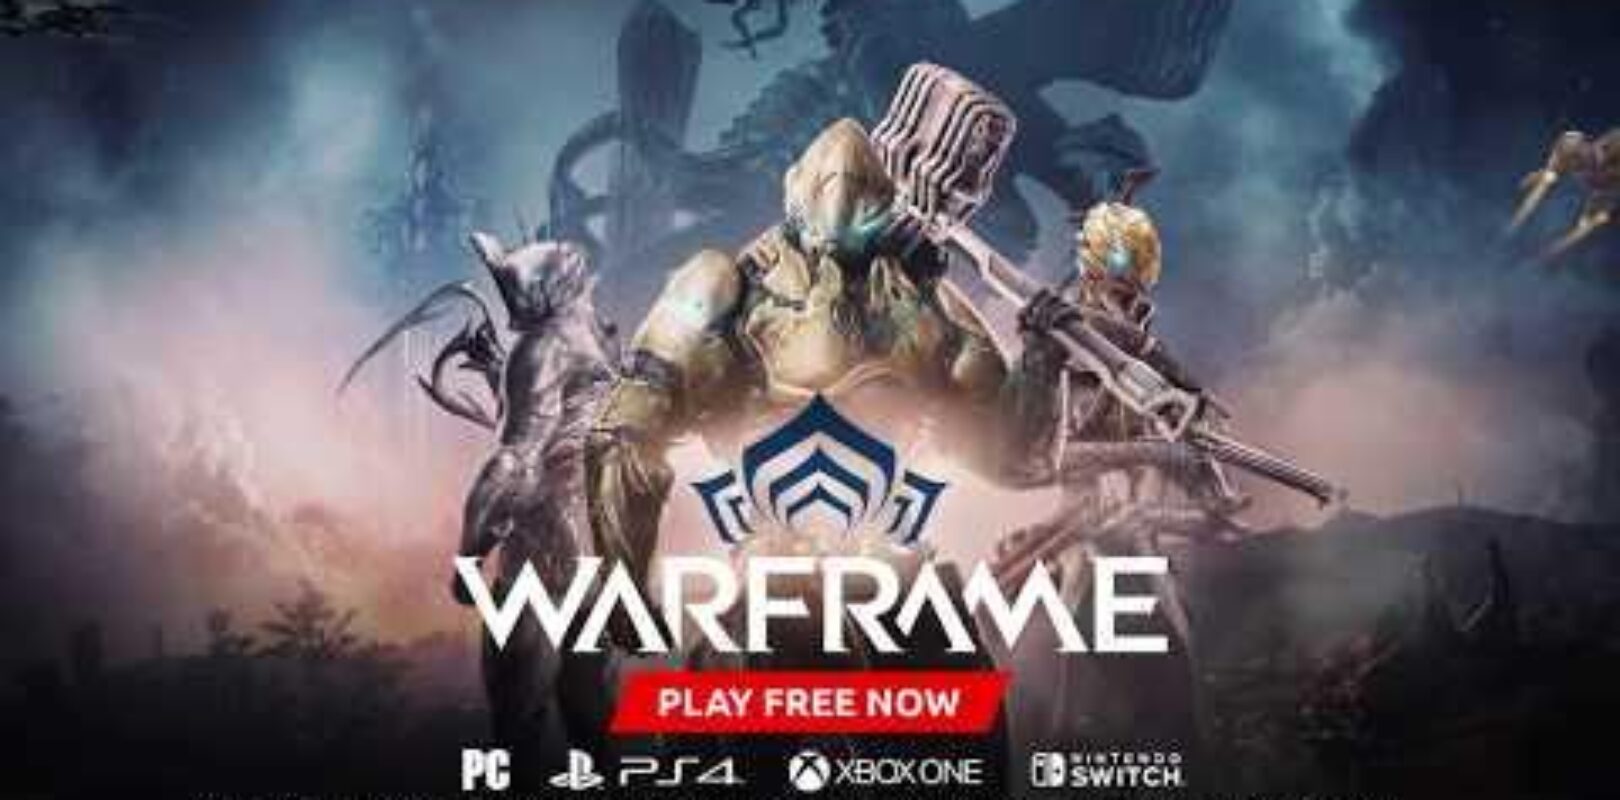 T Mobile Warframe Game Pack Key Code Giveaway Pc Ended Pivotal Gamers - roblox keycode